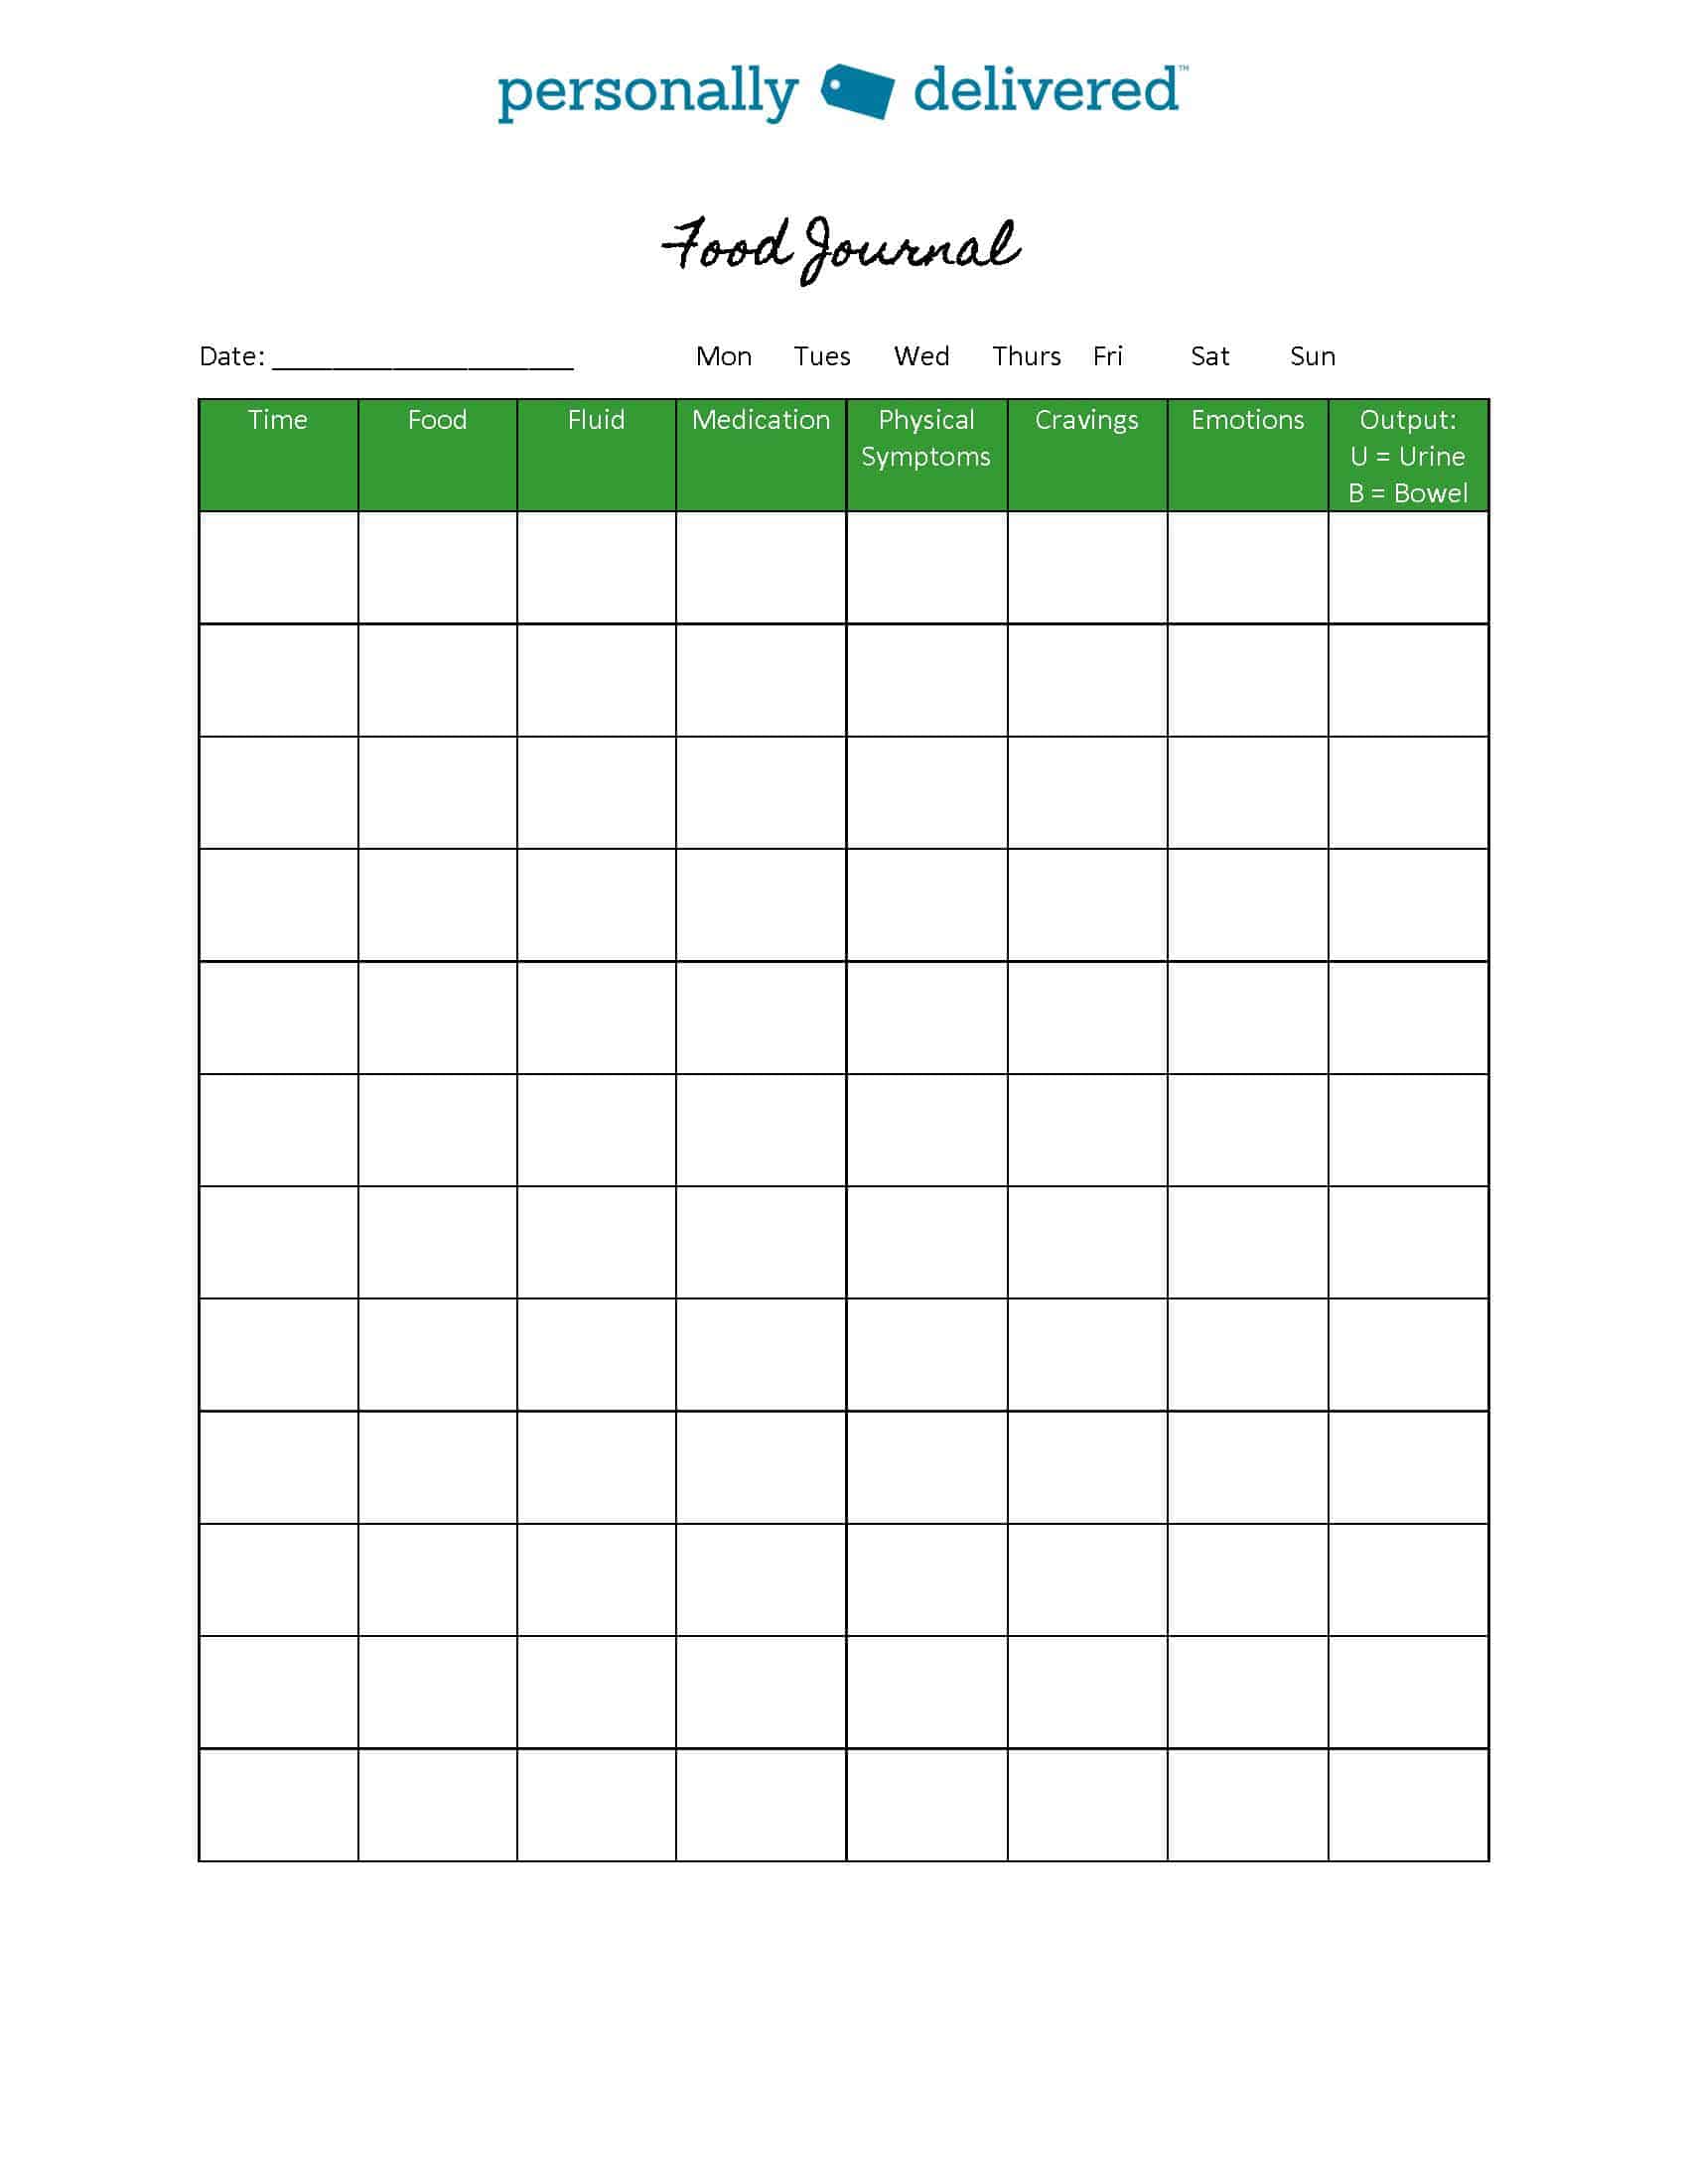 Food Journal to help manage an ostomy diet